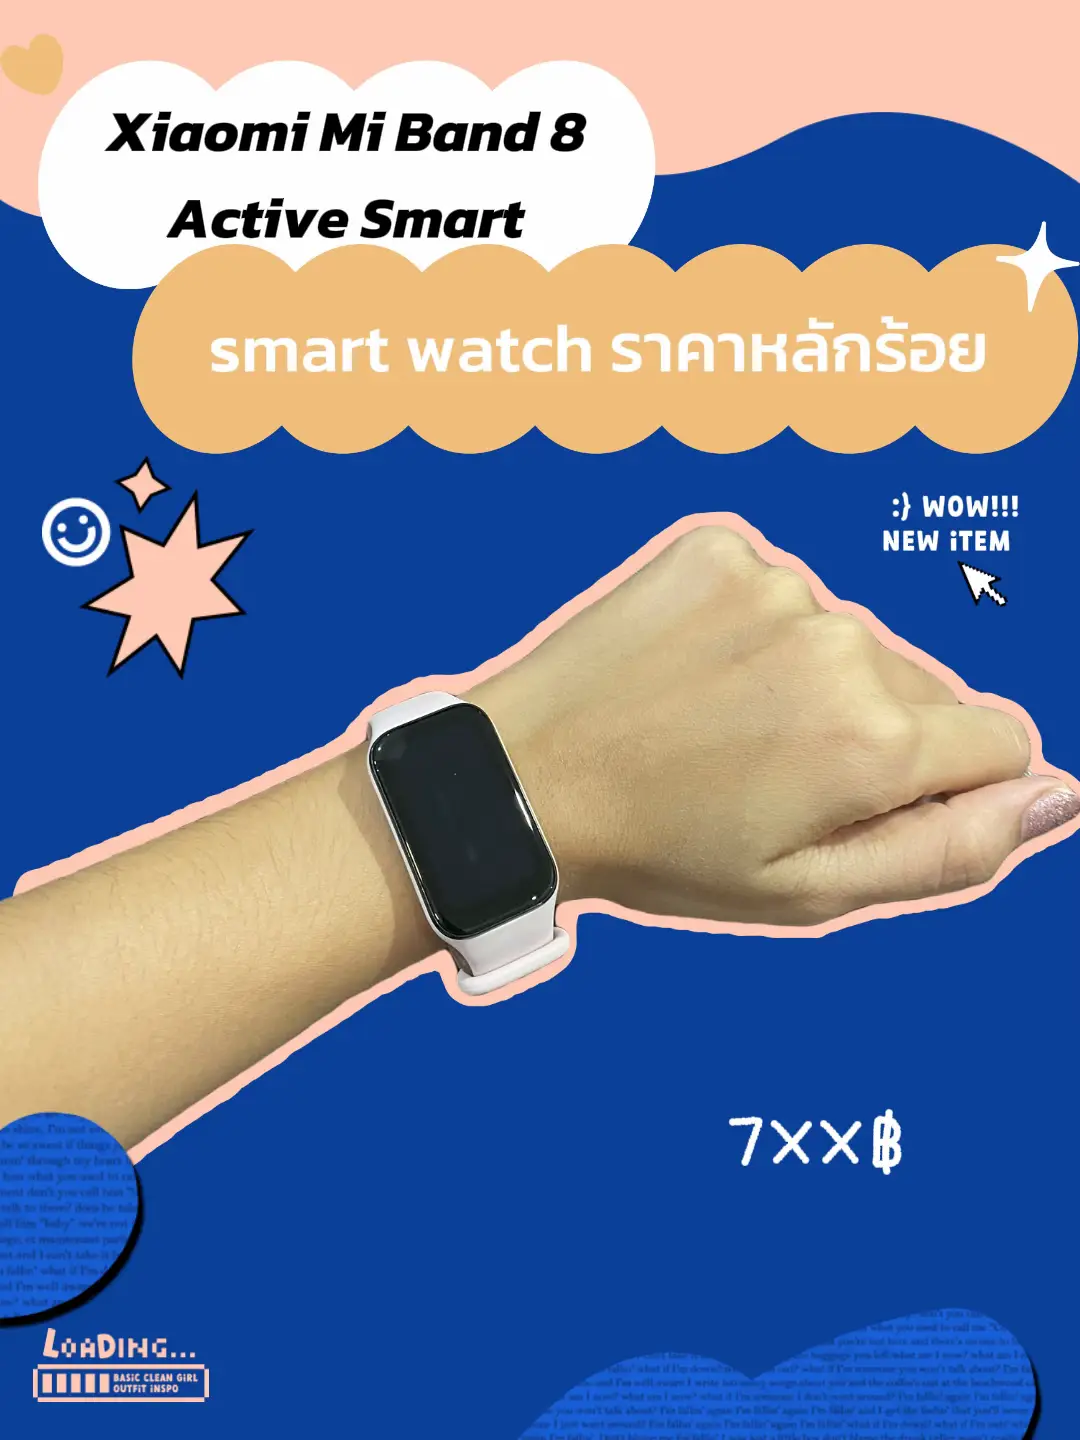 ✍ Xiaomi Mi Band 8 Active Smart Band8 Primary Price✨, Gallery posted by  ɴᴀᴛᴛᴀʀɪᴋᴀ ⁺◟✿